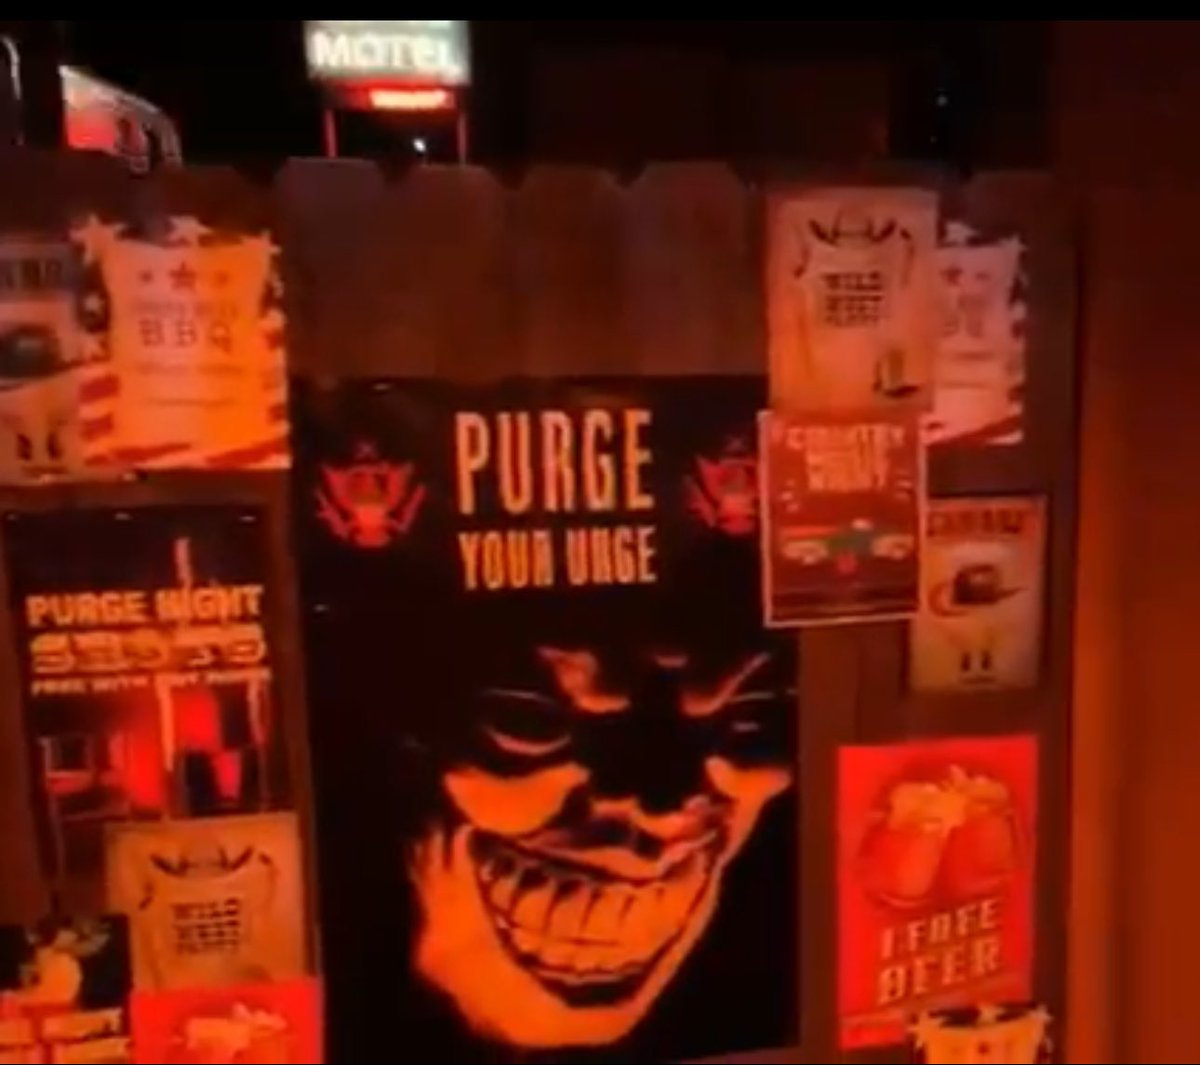 Do you remember the Purge on the Terror Tram during @HorrorNights ? @blumhouse